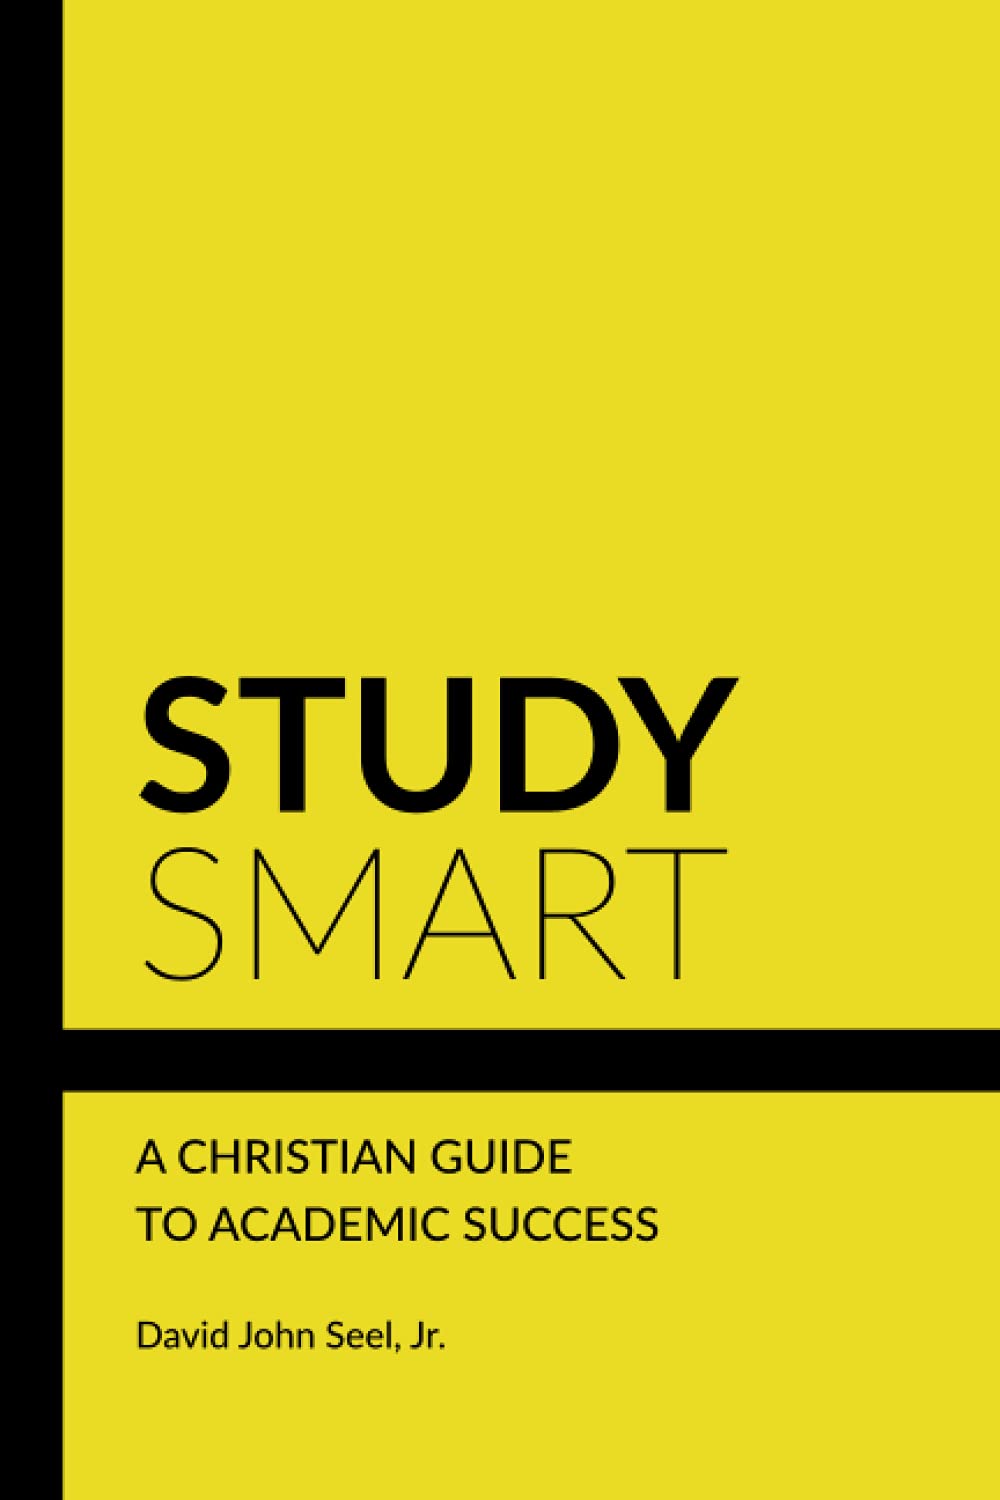 Study Smart: A Christian Guide to Academic Success